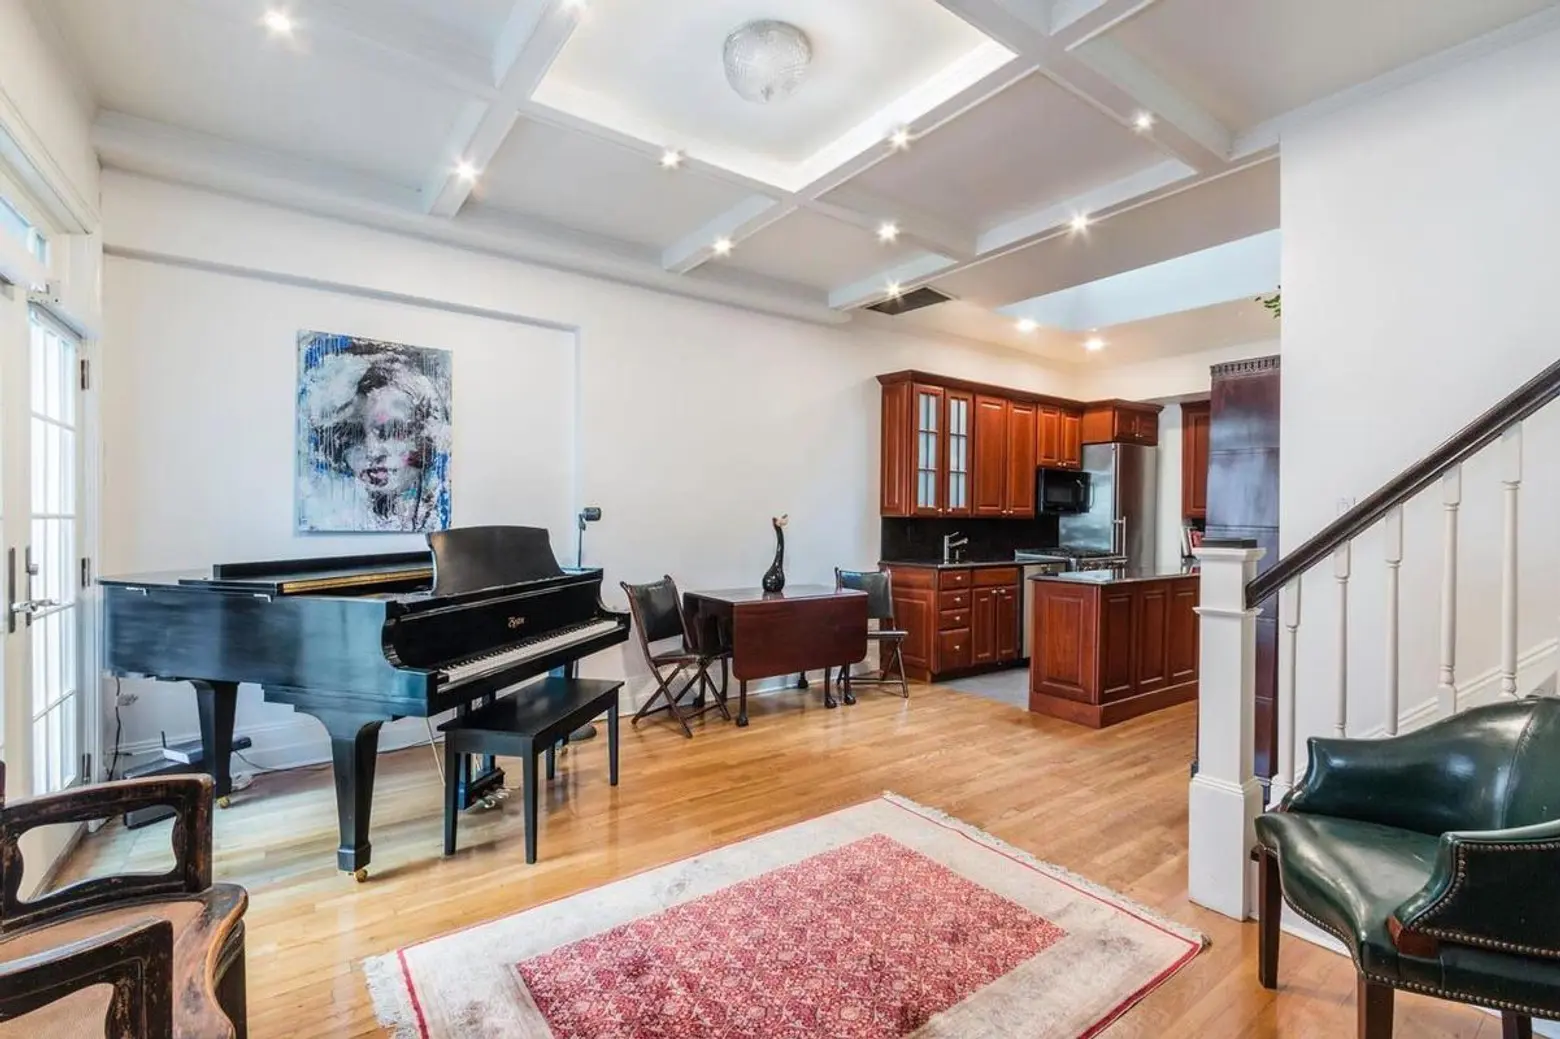 $4.4M Upper East Side penthouse tops the townhouse where Marc Chagall once lived